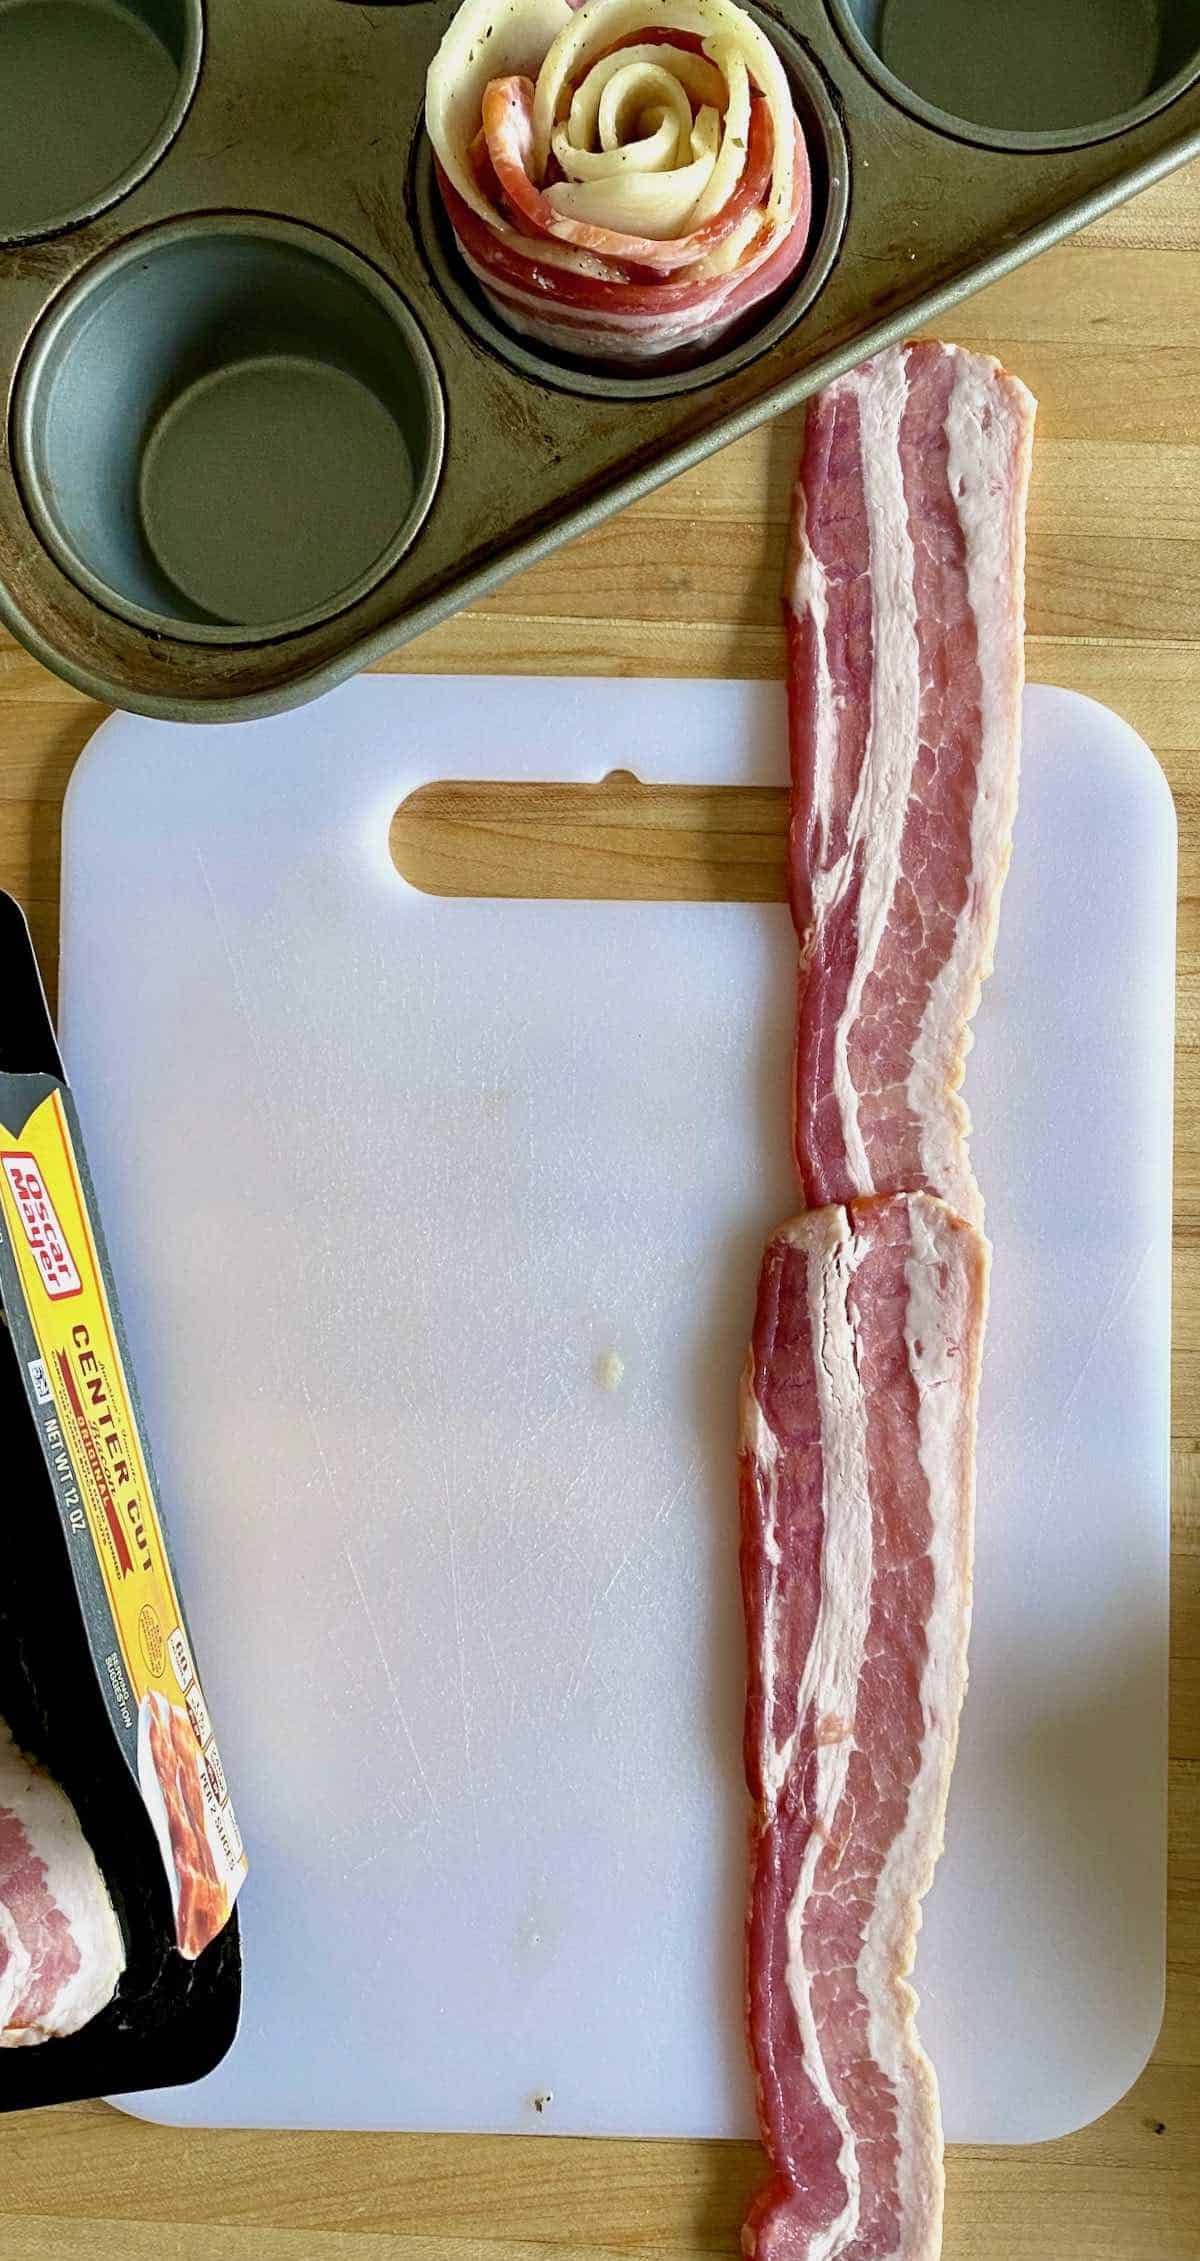 demo of lining up the bacon